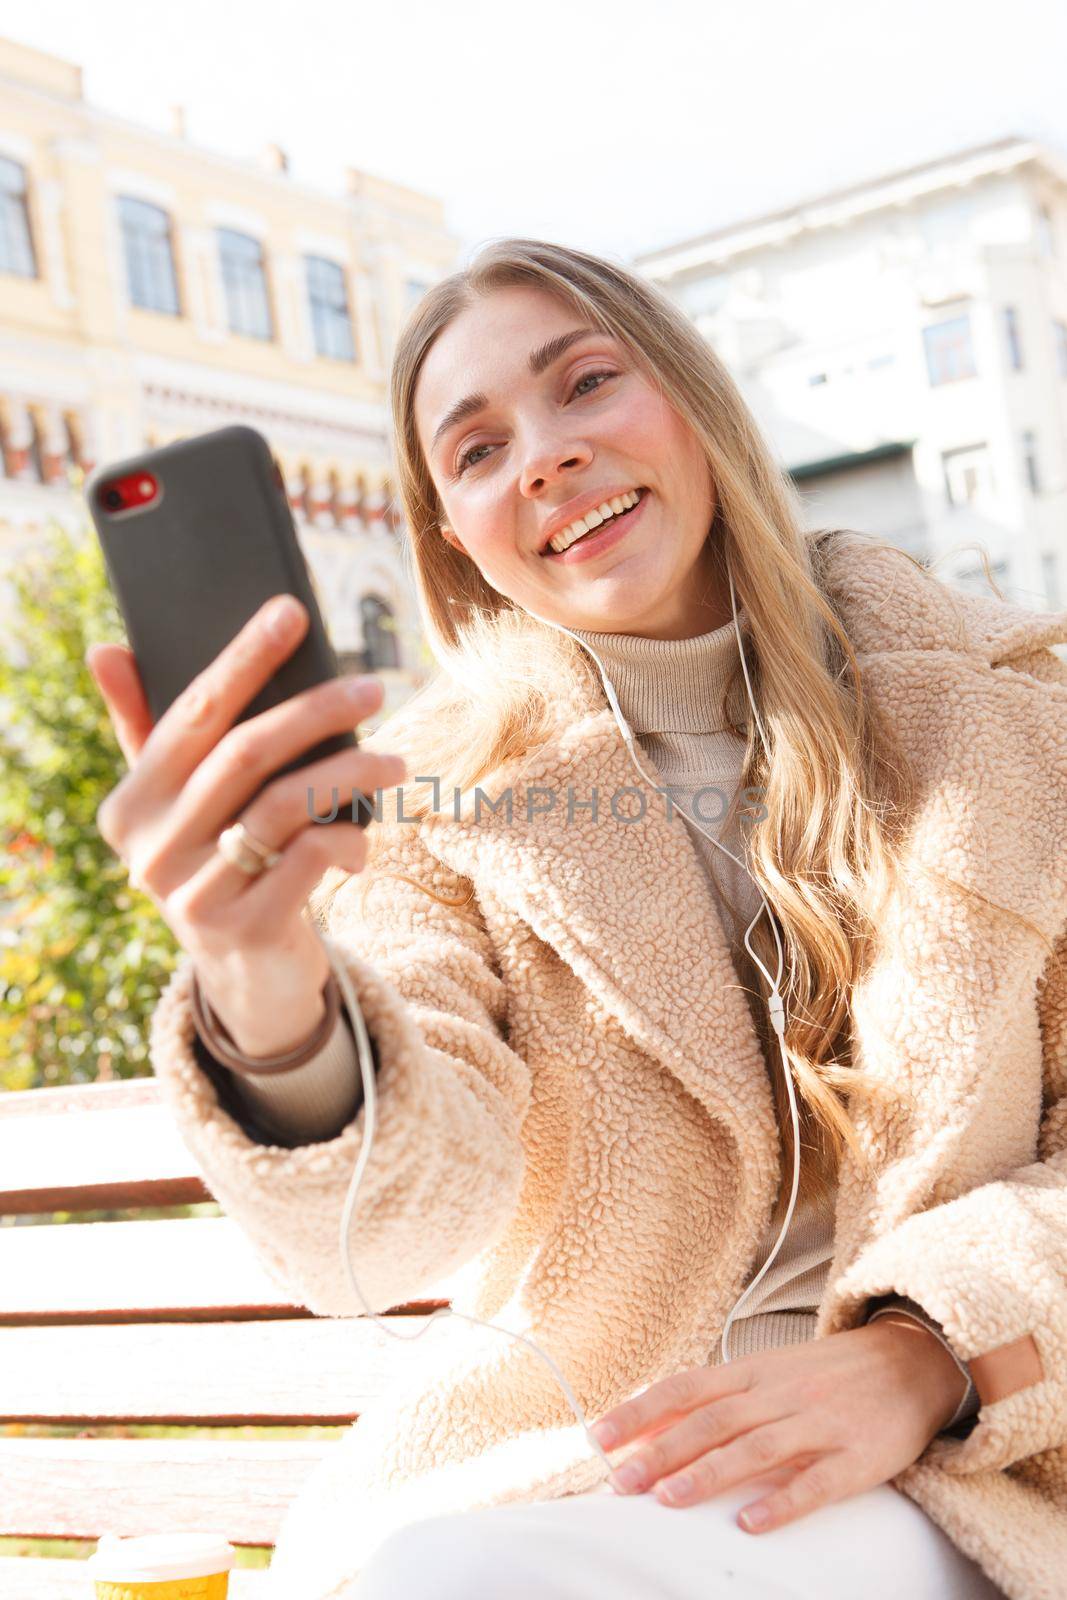 Vertical shot of a cheerful woman listening to music on her smart phone, wearing earphones